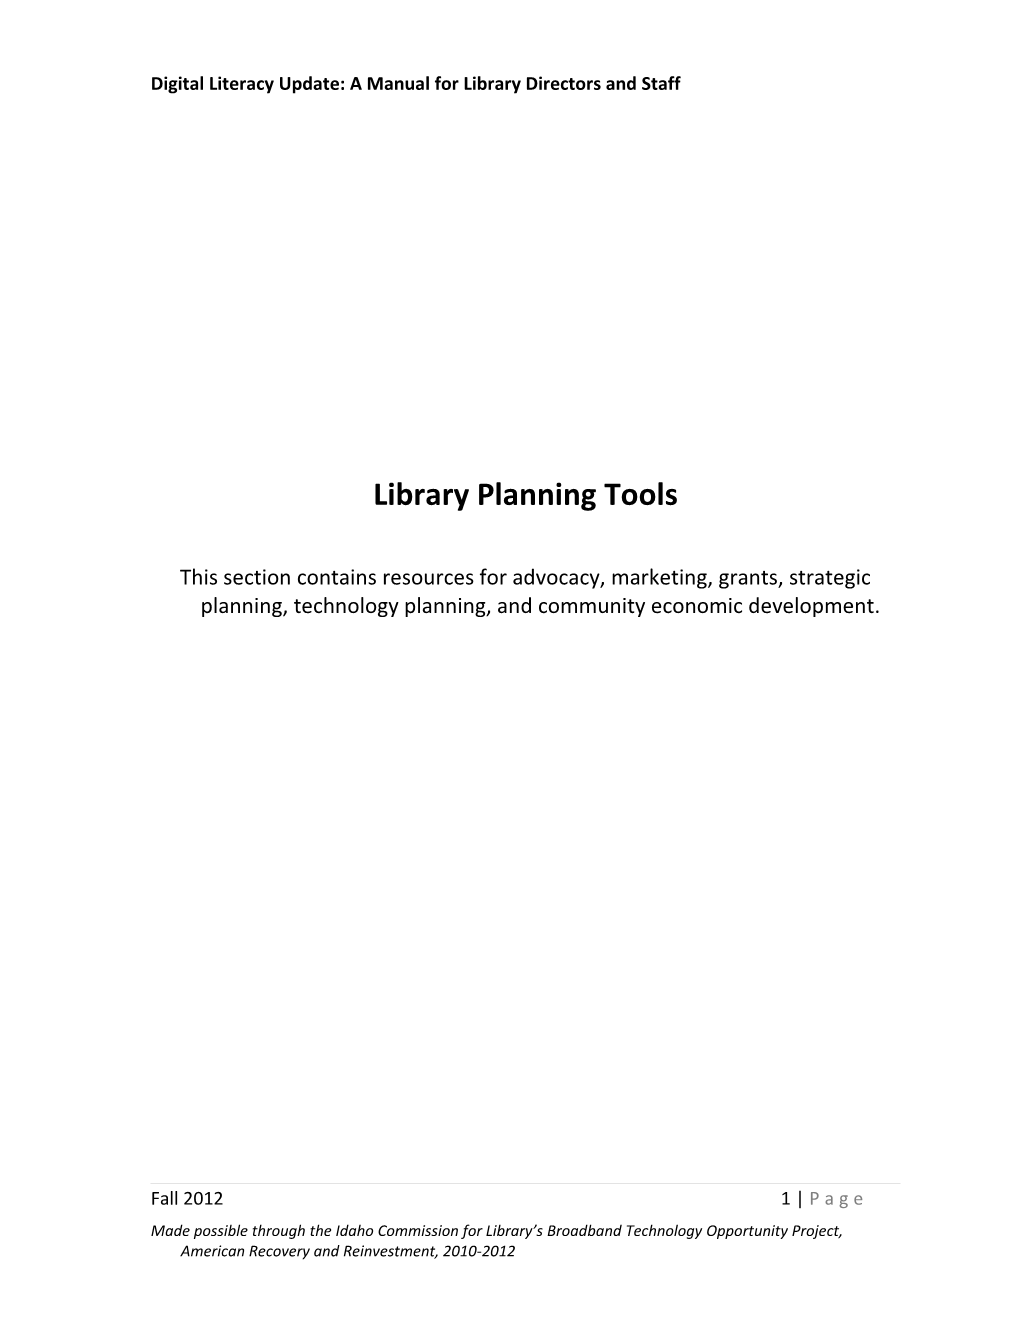 Library Planning Tools